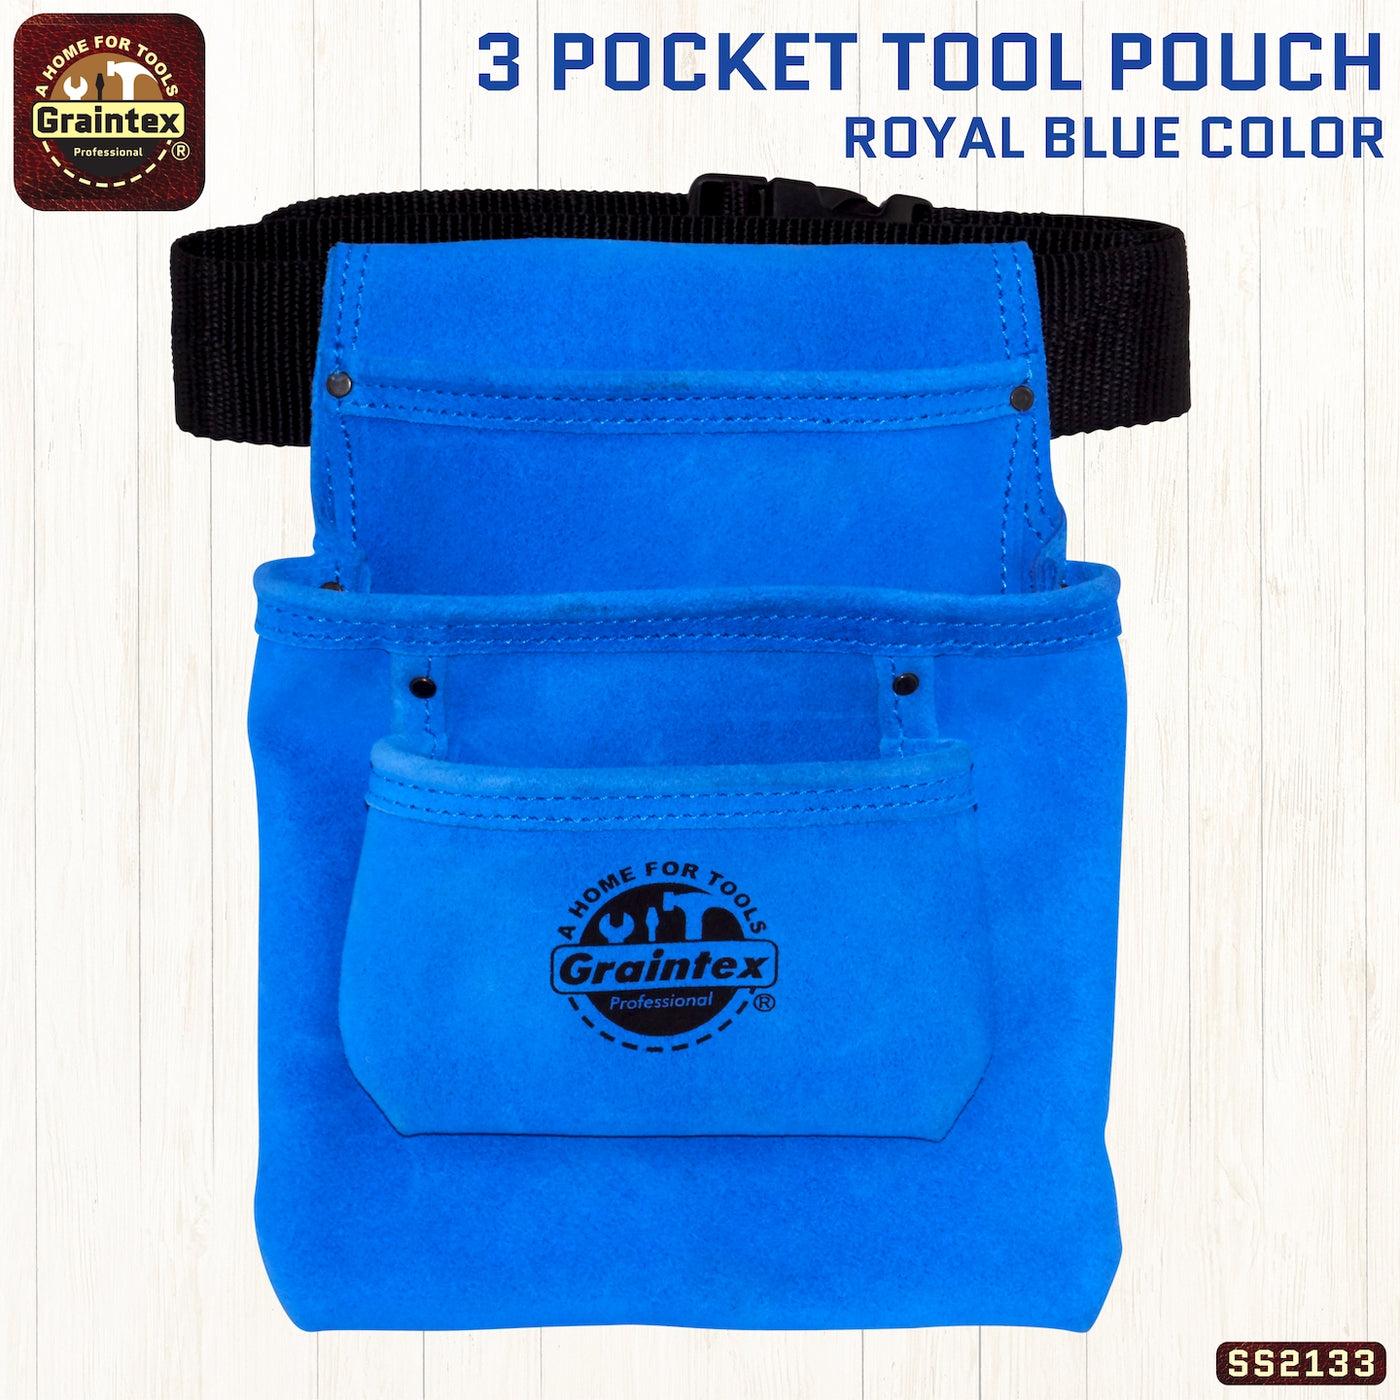 SS2133 :: 3 Pocket Nail & Tool Pouch Royal Blue Color Suede Leather with Belt